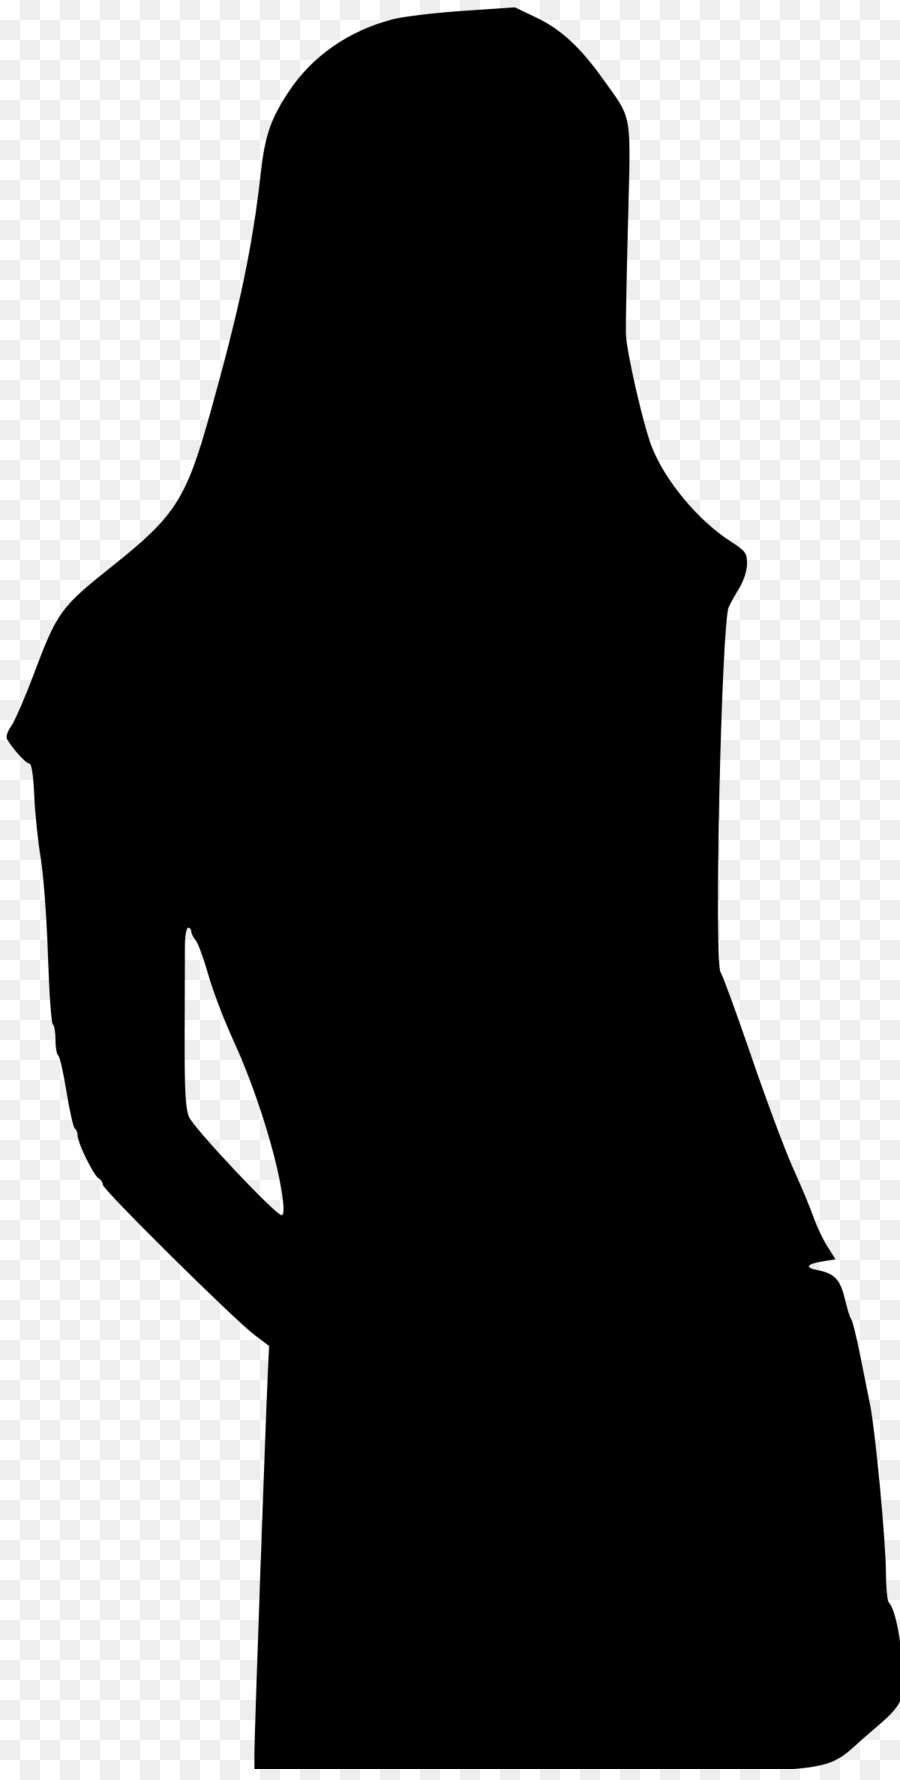 Silhouette Woman Clip art - Silhouette png download - 1200*2358 - Free Transparent  png Download.